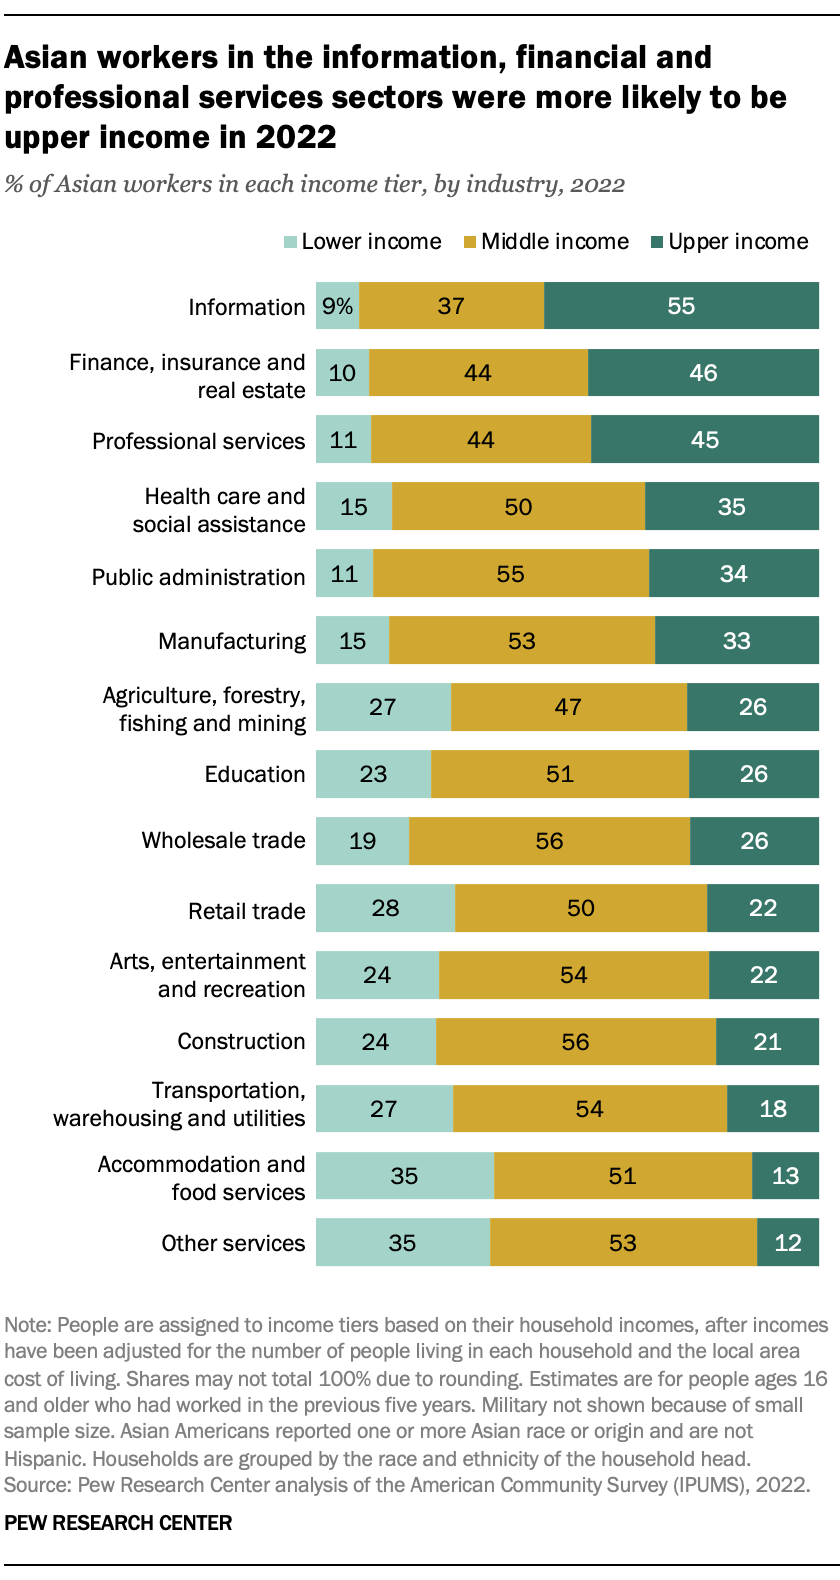 A bar chart showing that Asian workers in the information, financial and professional services sectors were more likely to be upper income in 2022